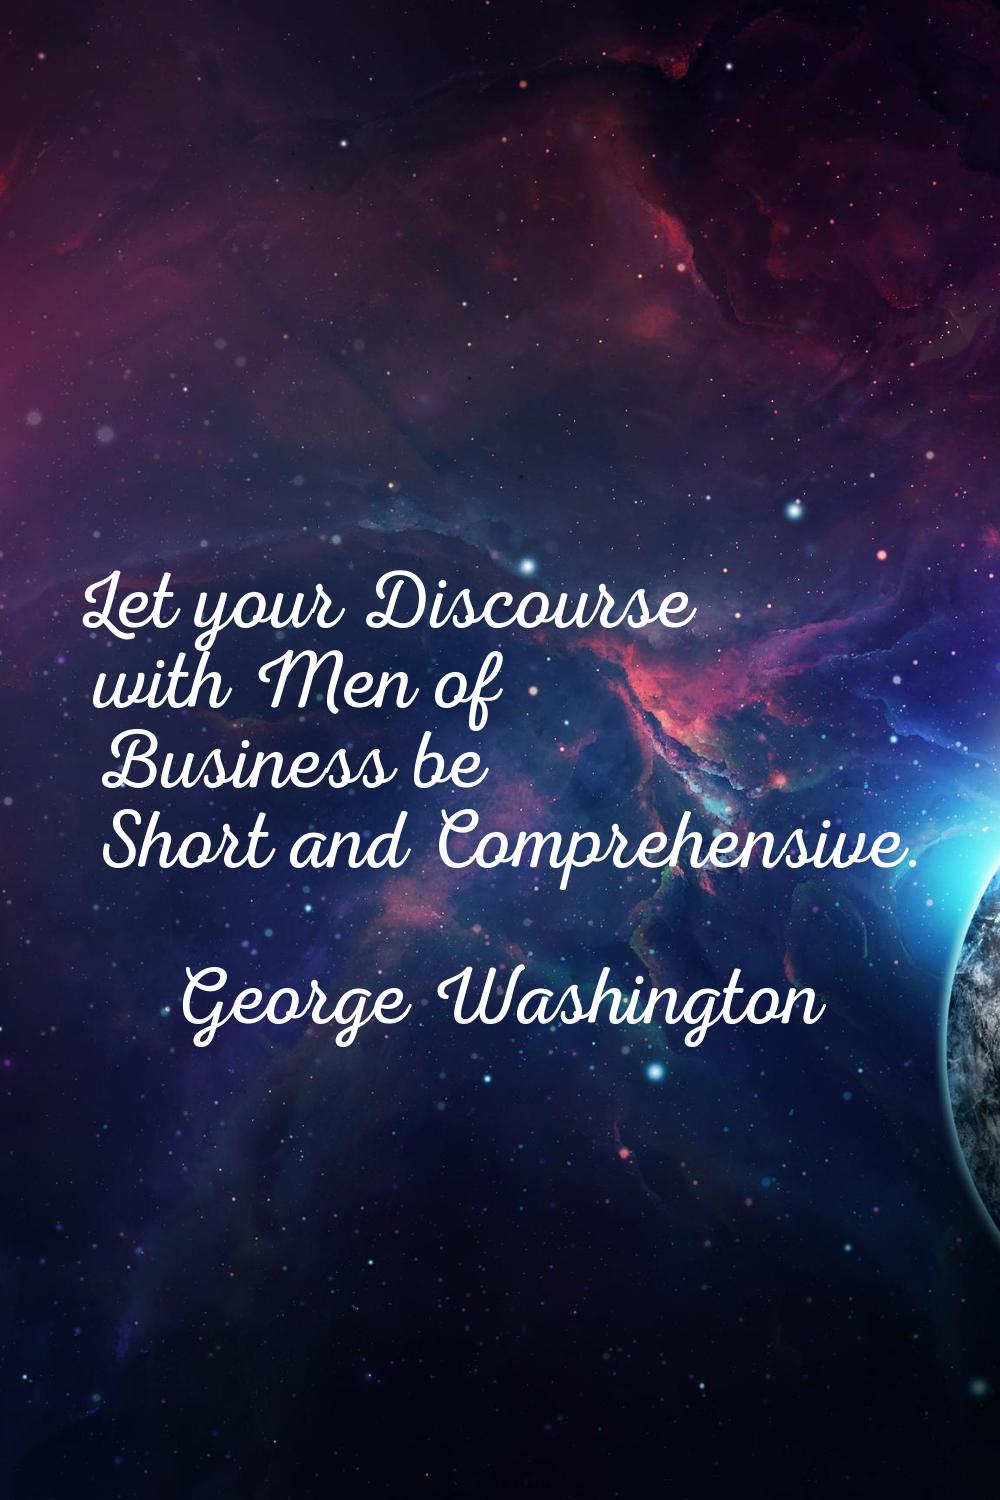 Let your Discourse with Men of Business be Short and Comprehensive.